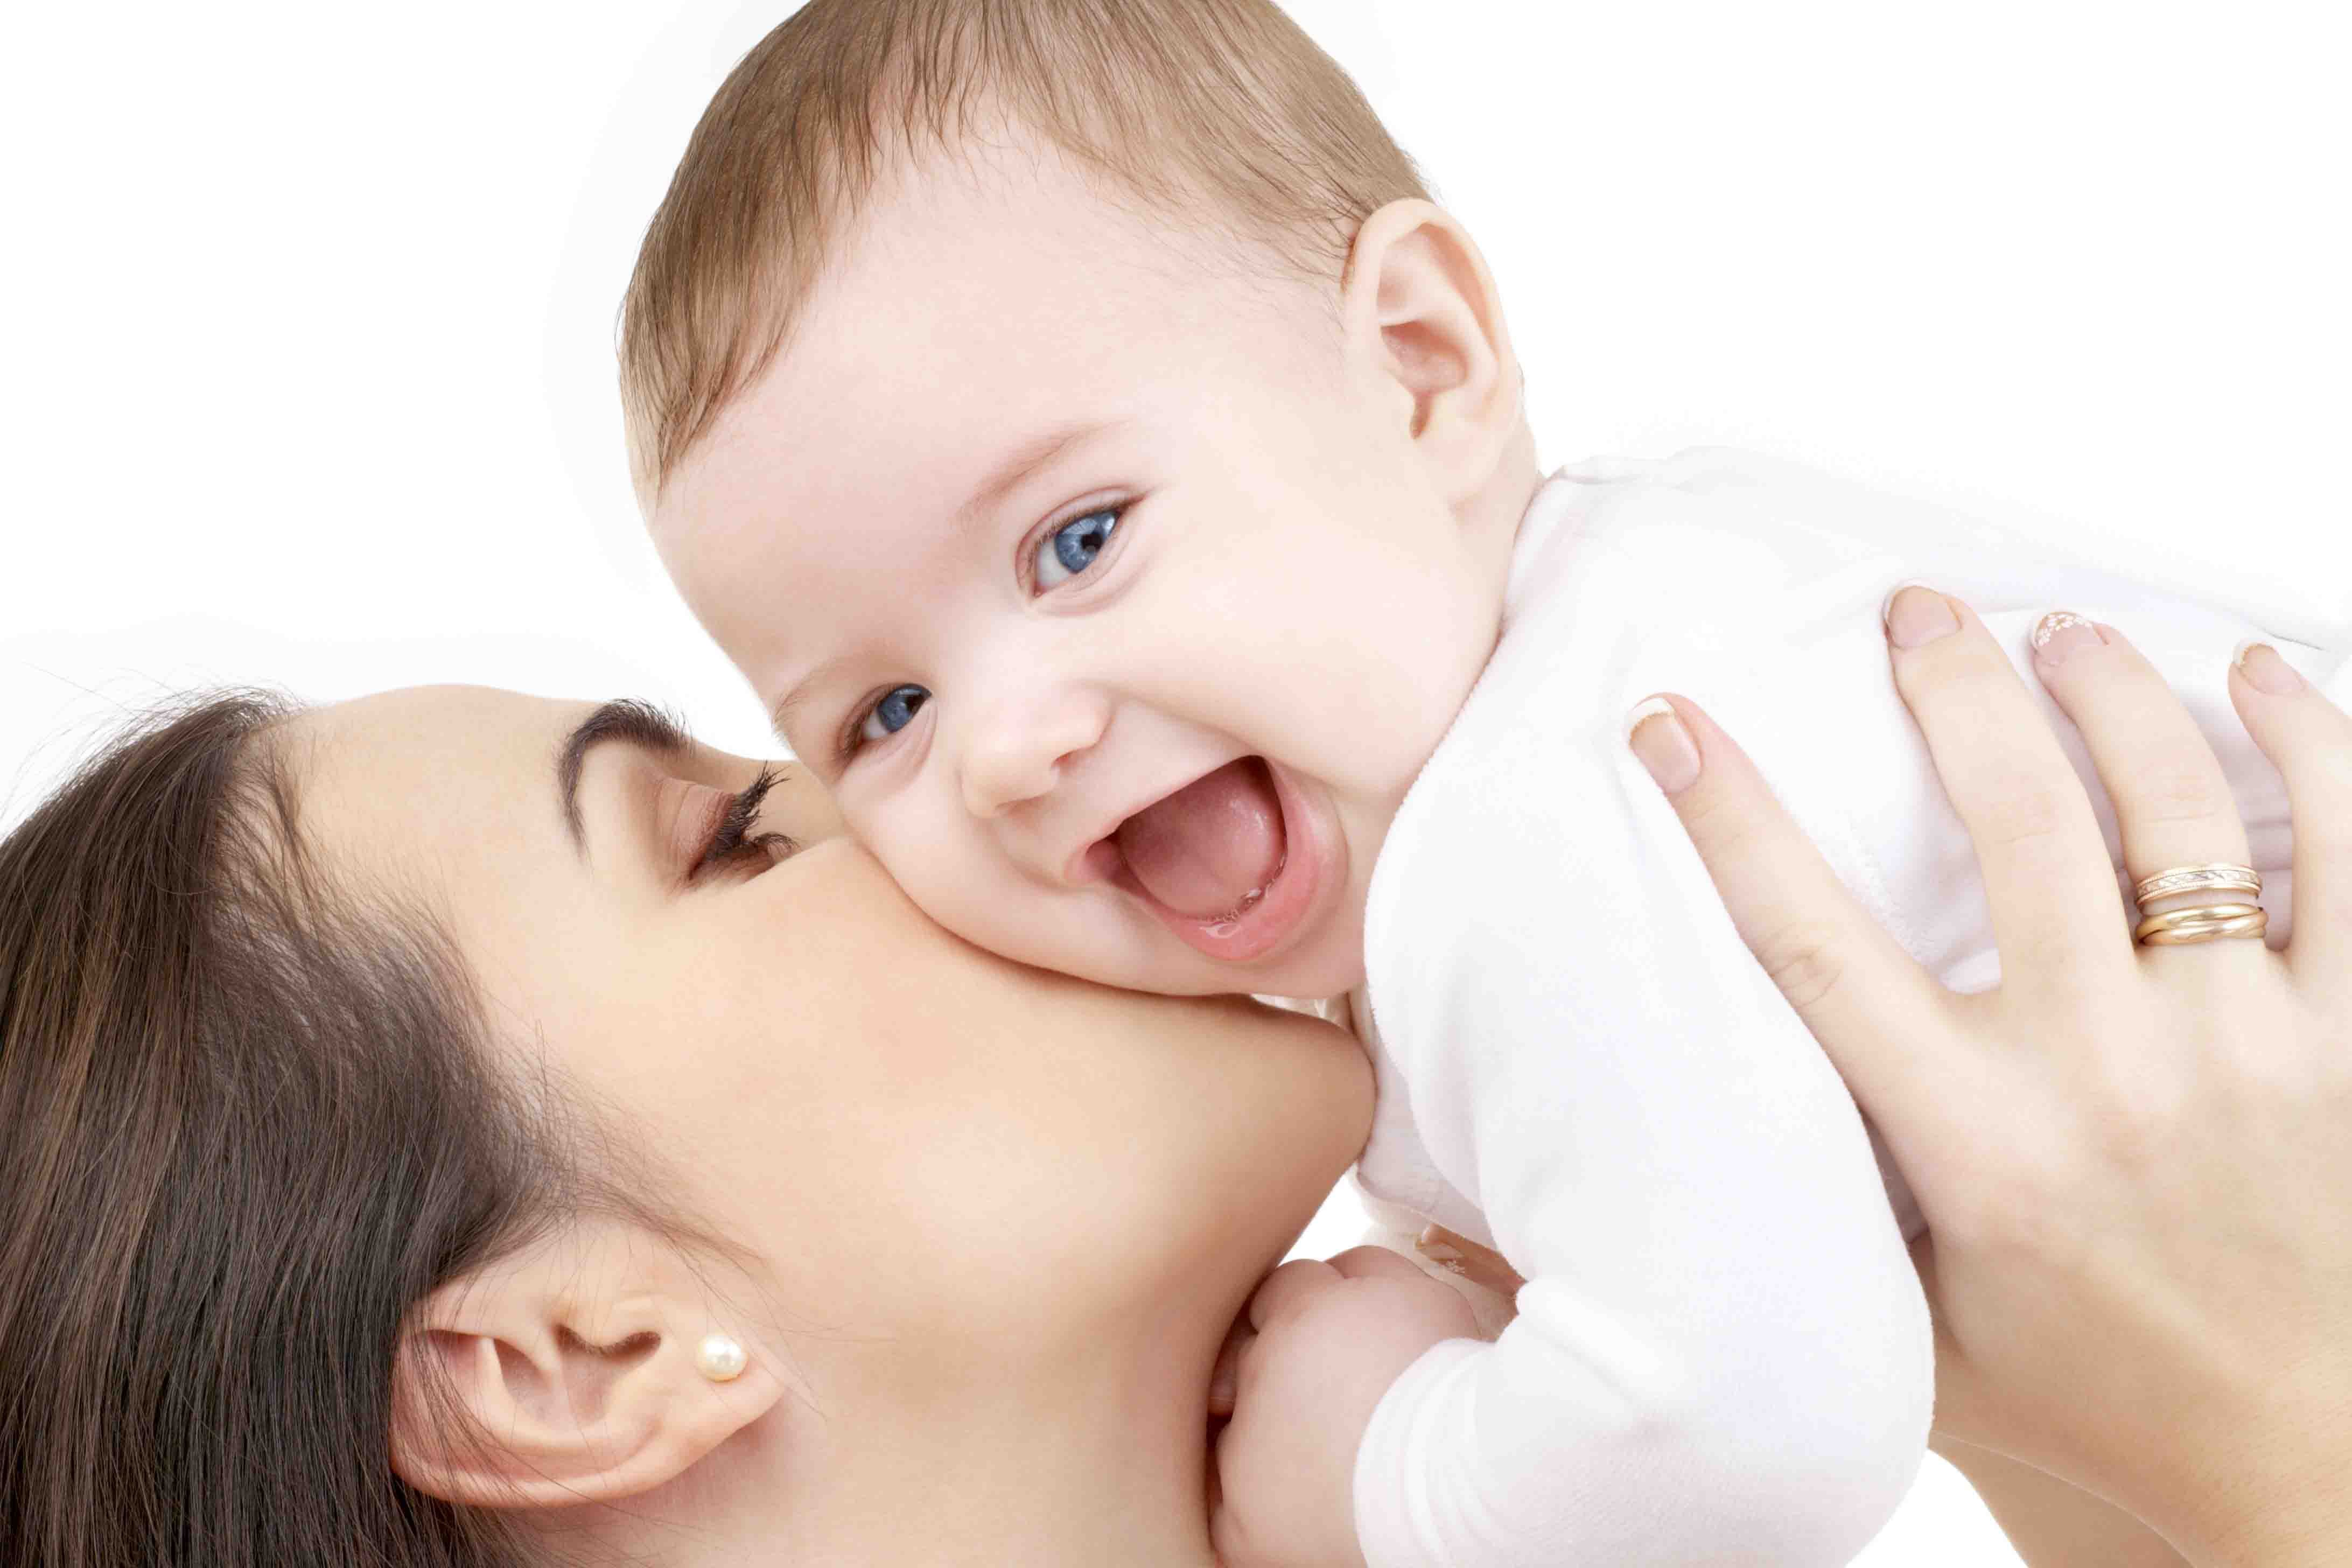 Baby Boy Wallpaper - Mother & Child Care - HD Wallpaper 